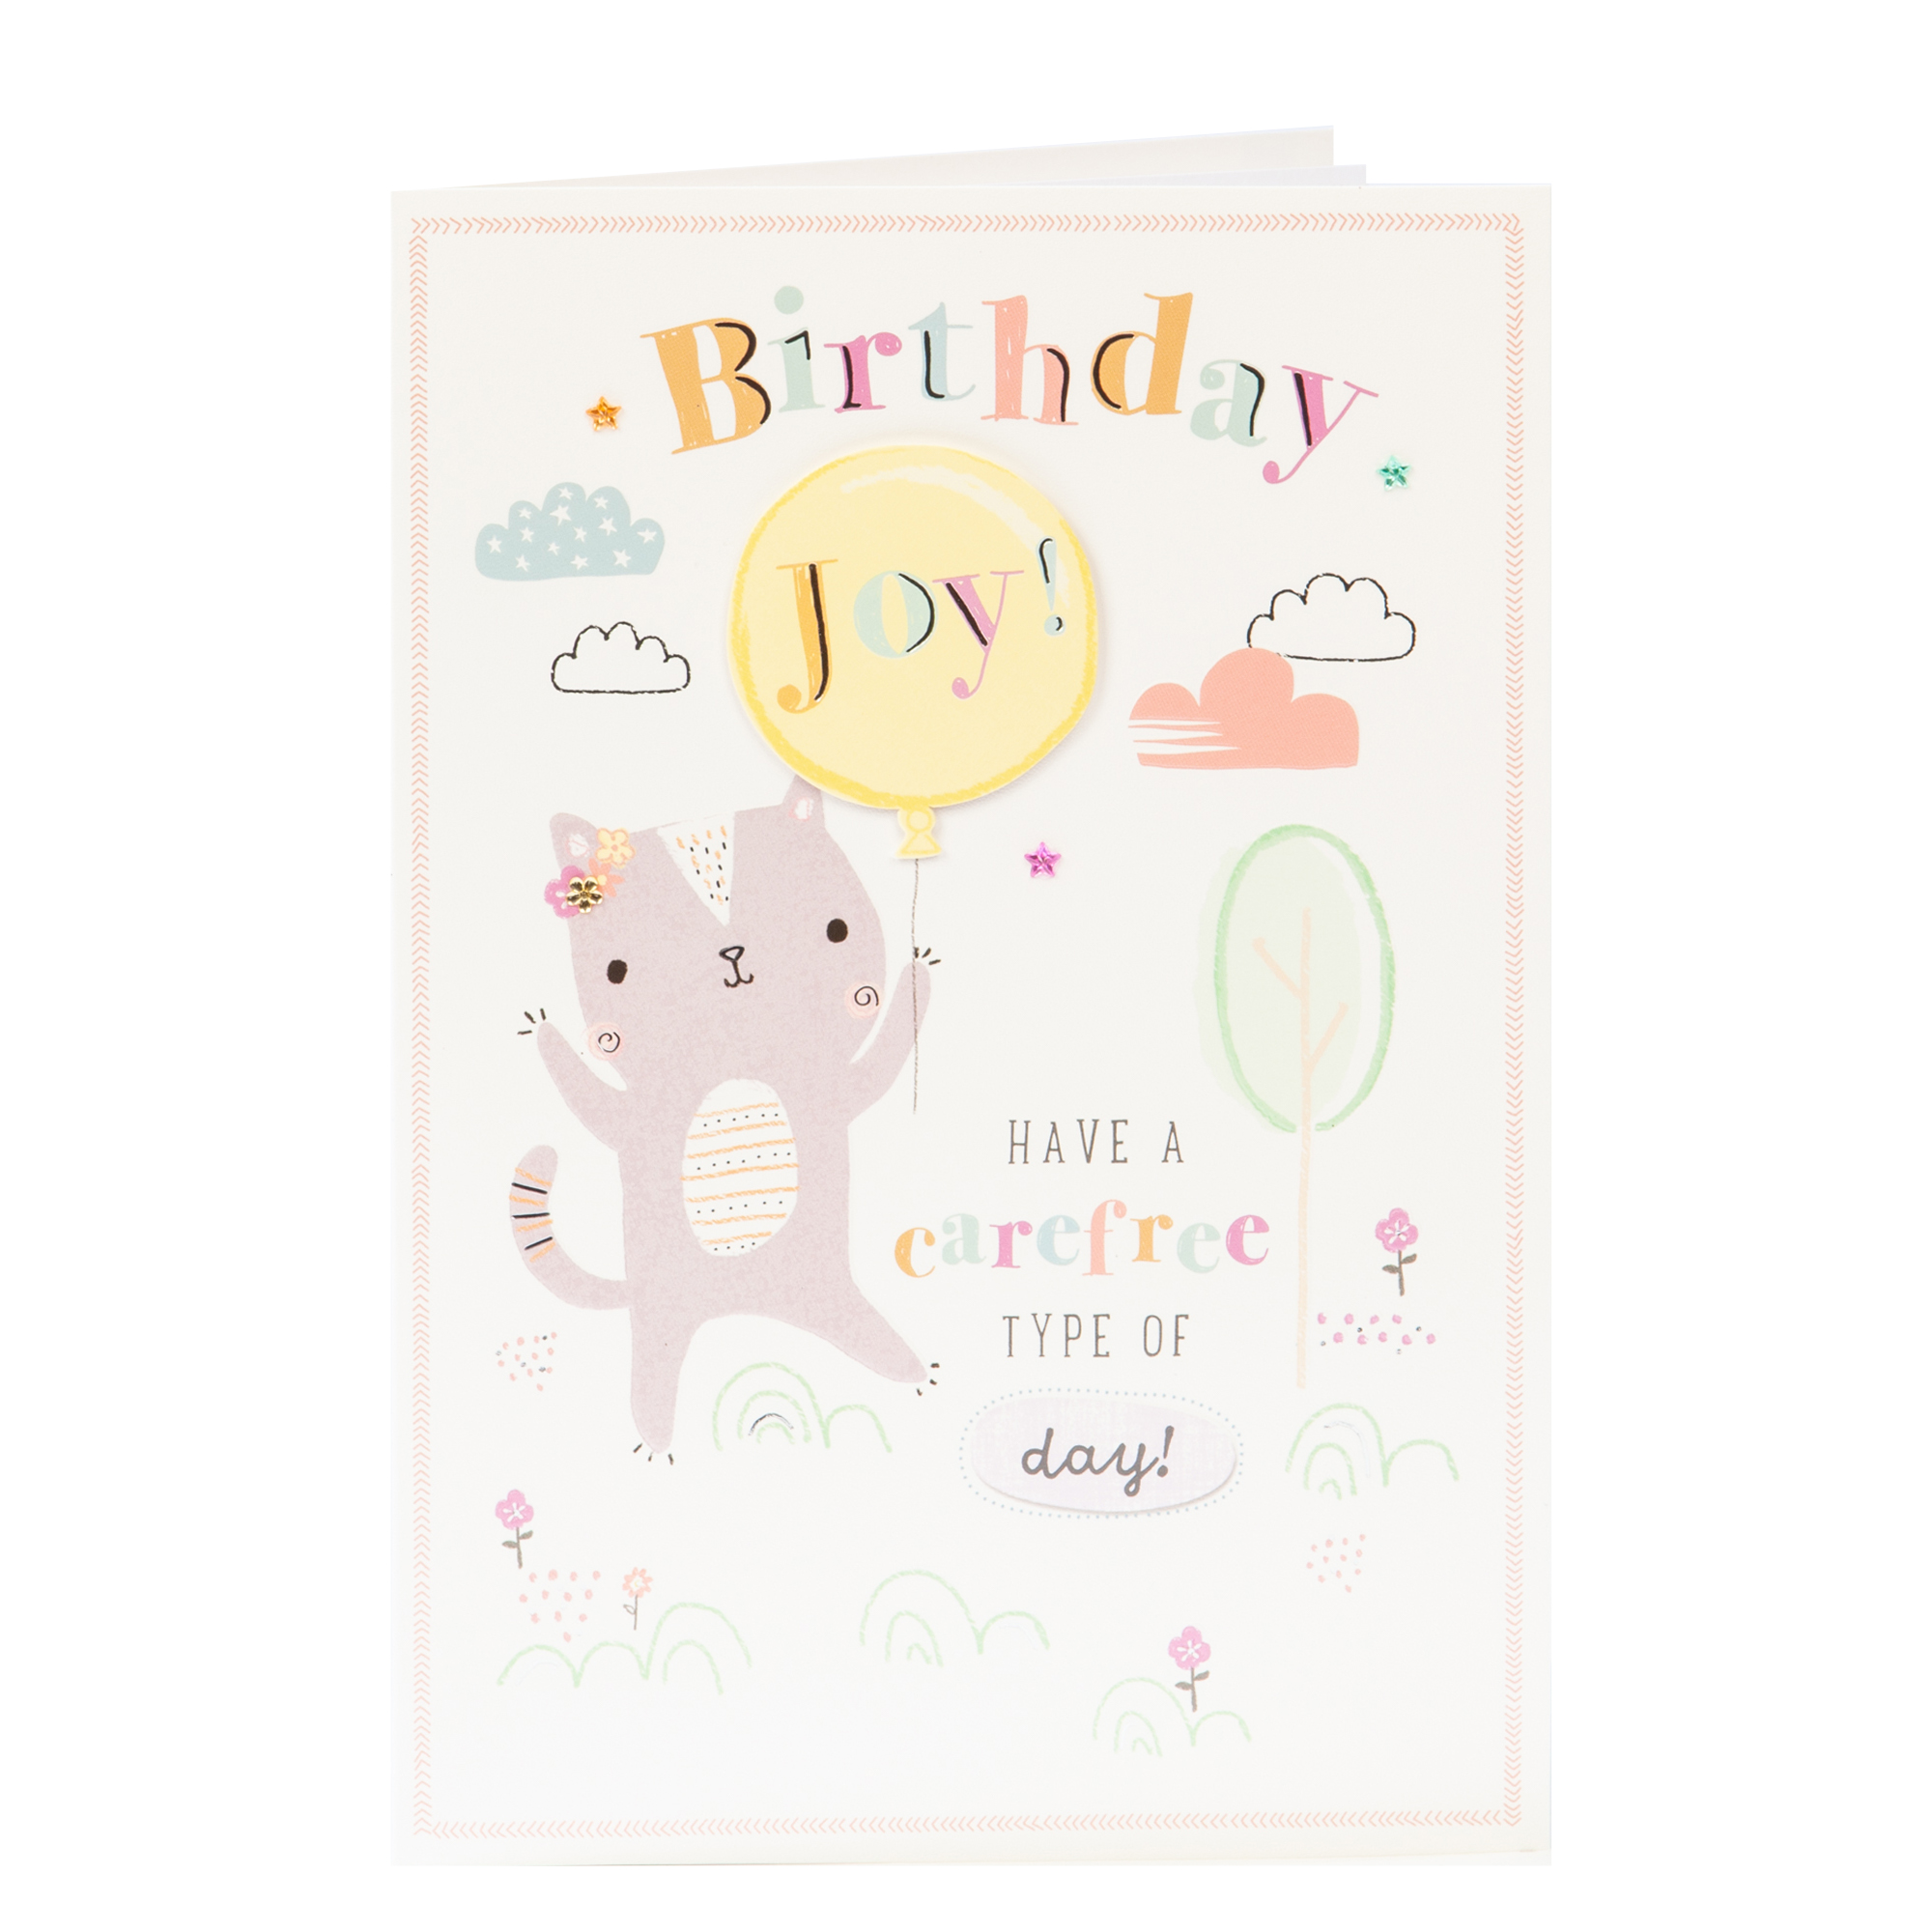 Birthday Card - Have A Carefree Type Of Day